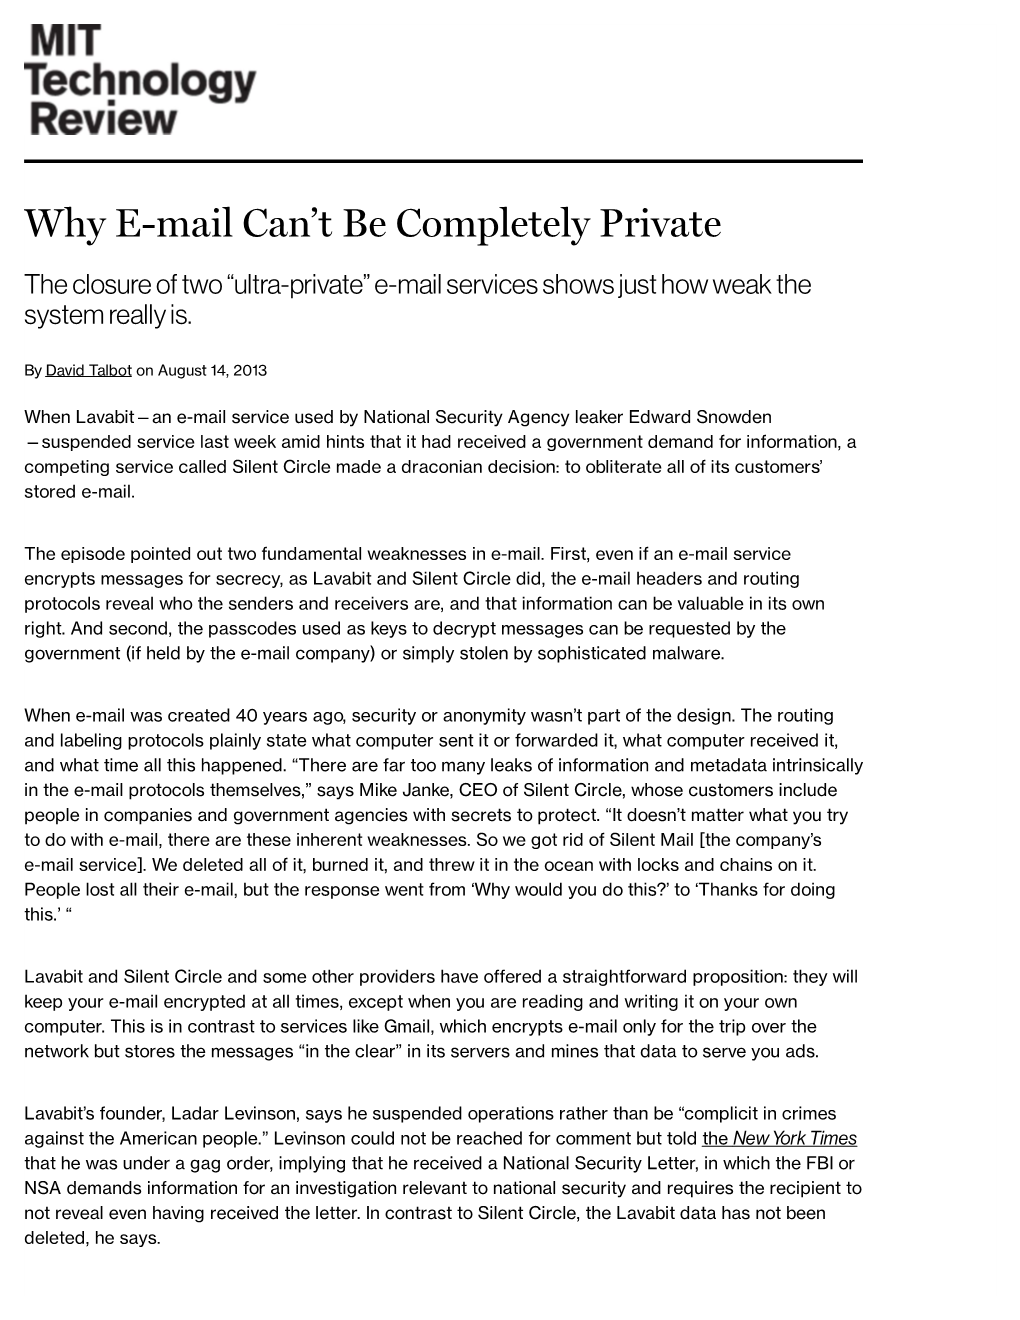 If You Want Secure E-Mail, Don't Write It Or Send It | MIT Technology Review